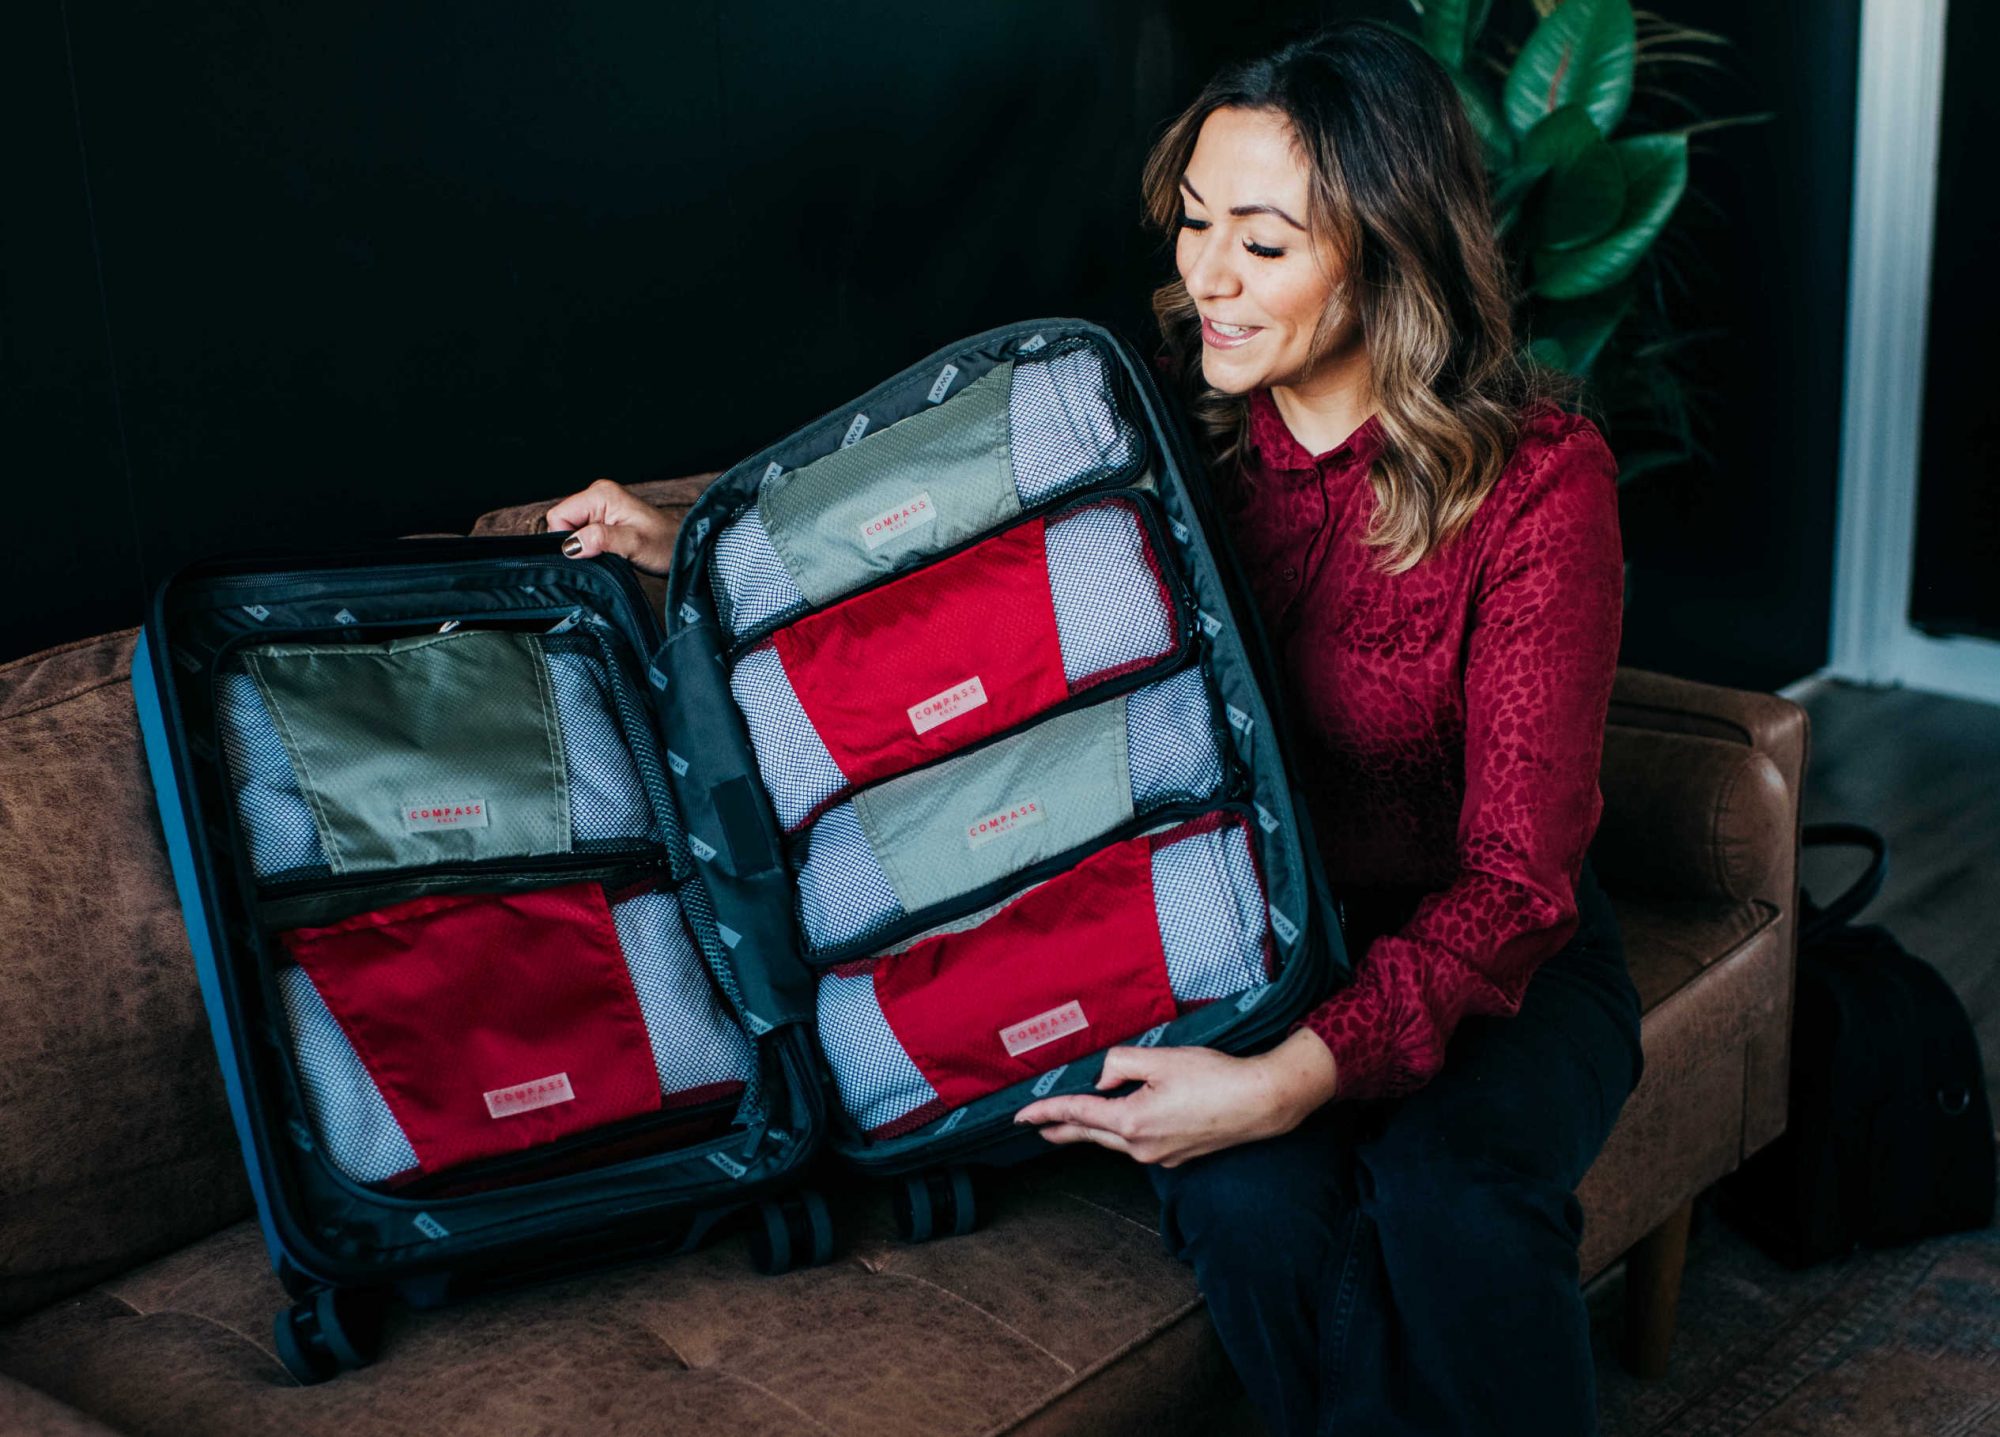 suitcase-recommendations-20-travel-experts-reveal-top-luggage-brands